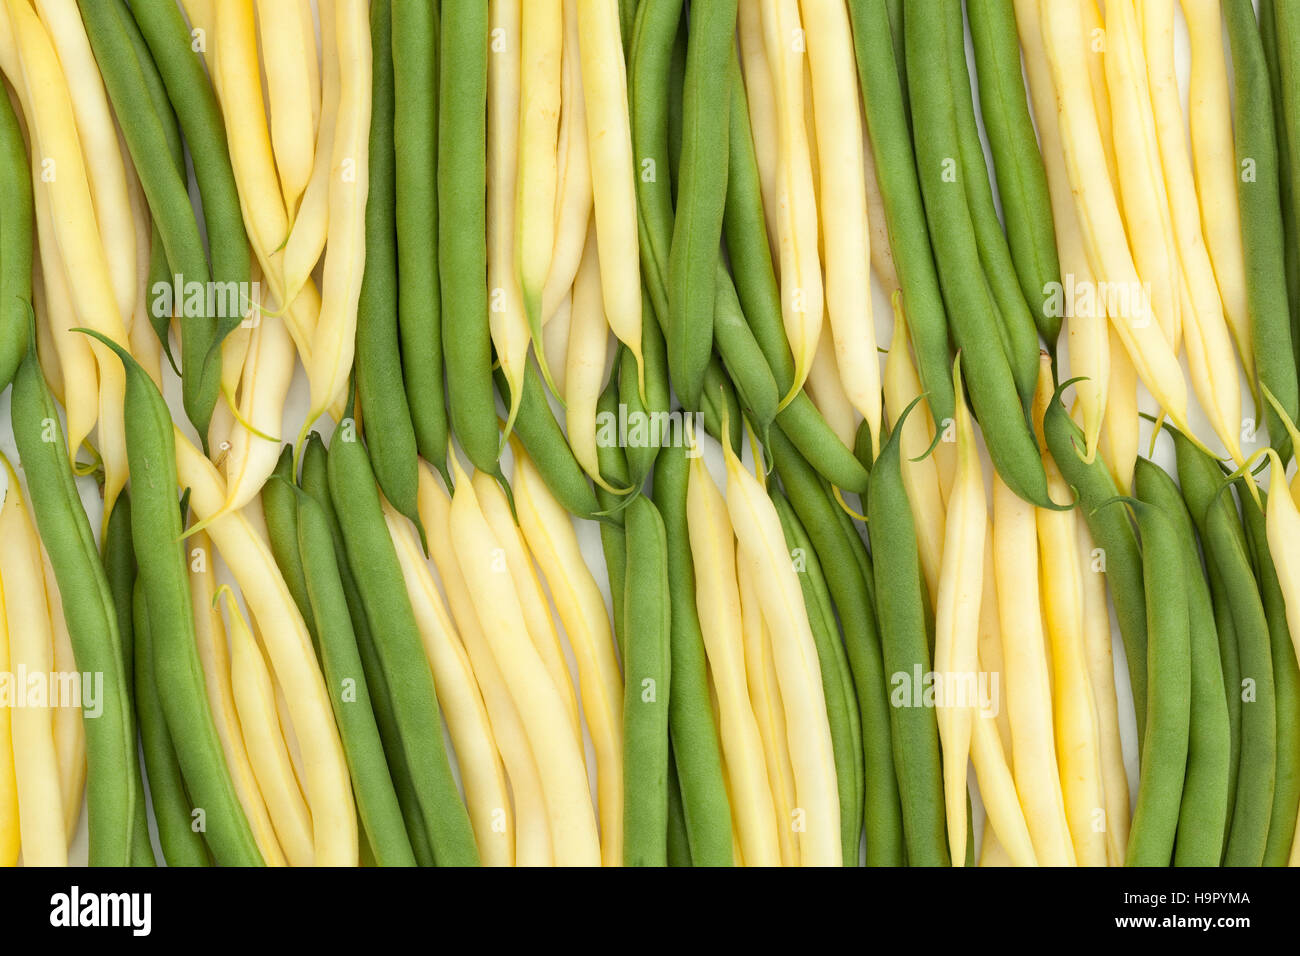 fresh green and yellow bean a arranged vertically Stock Photo